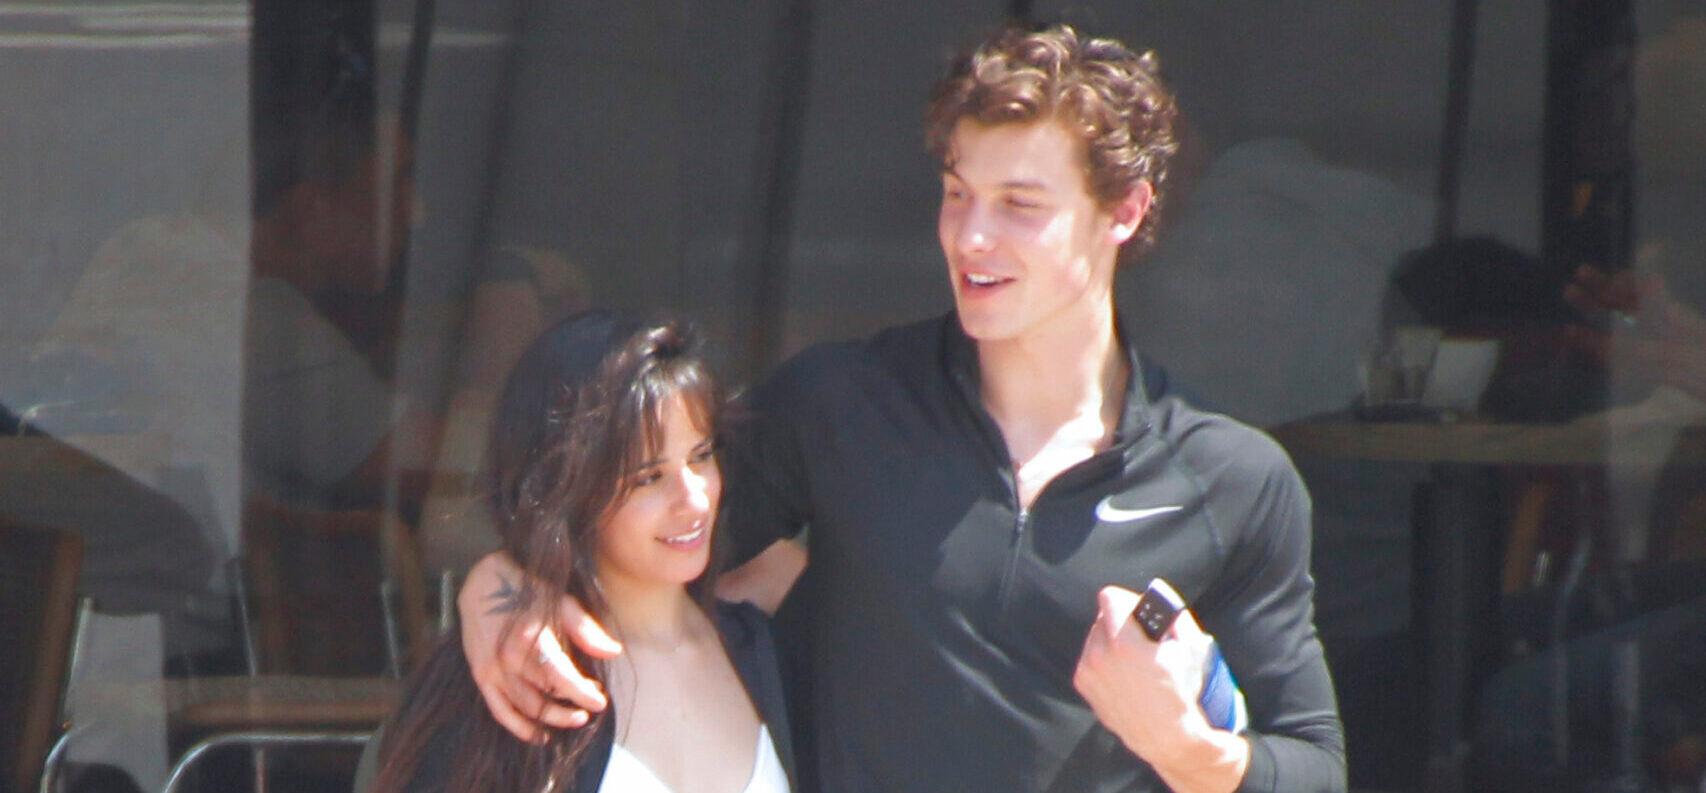 Shawn Mendes Asks ‘Are We Gonna Make It’ After Breakup From Camila Cabello